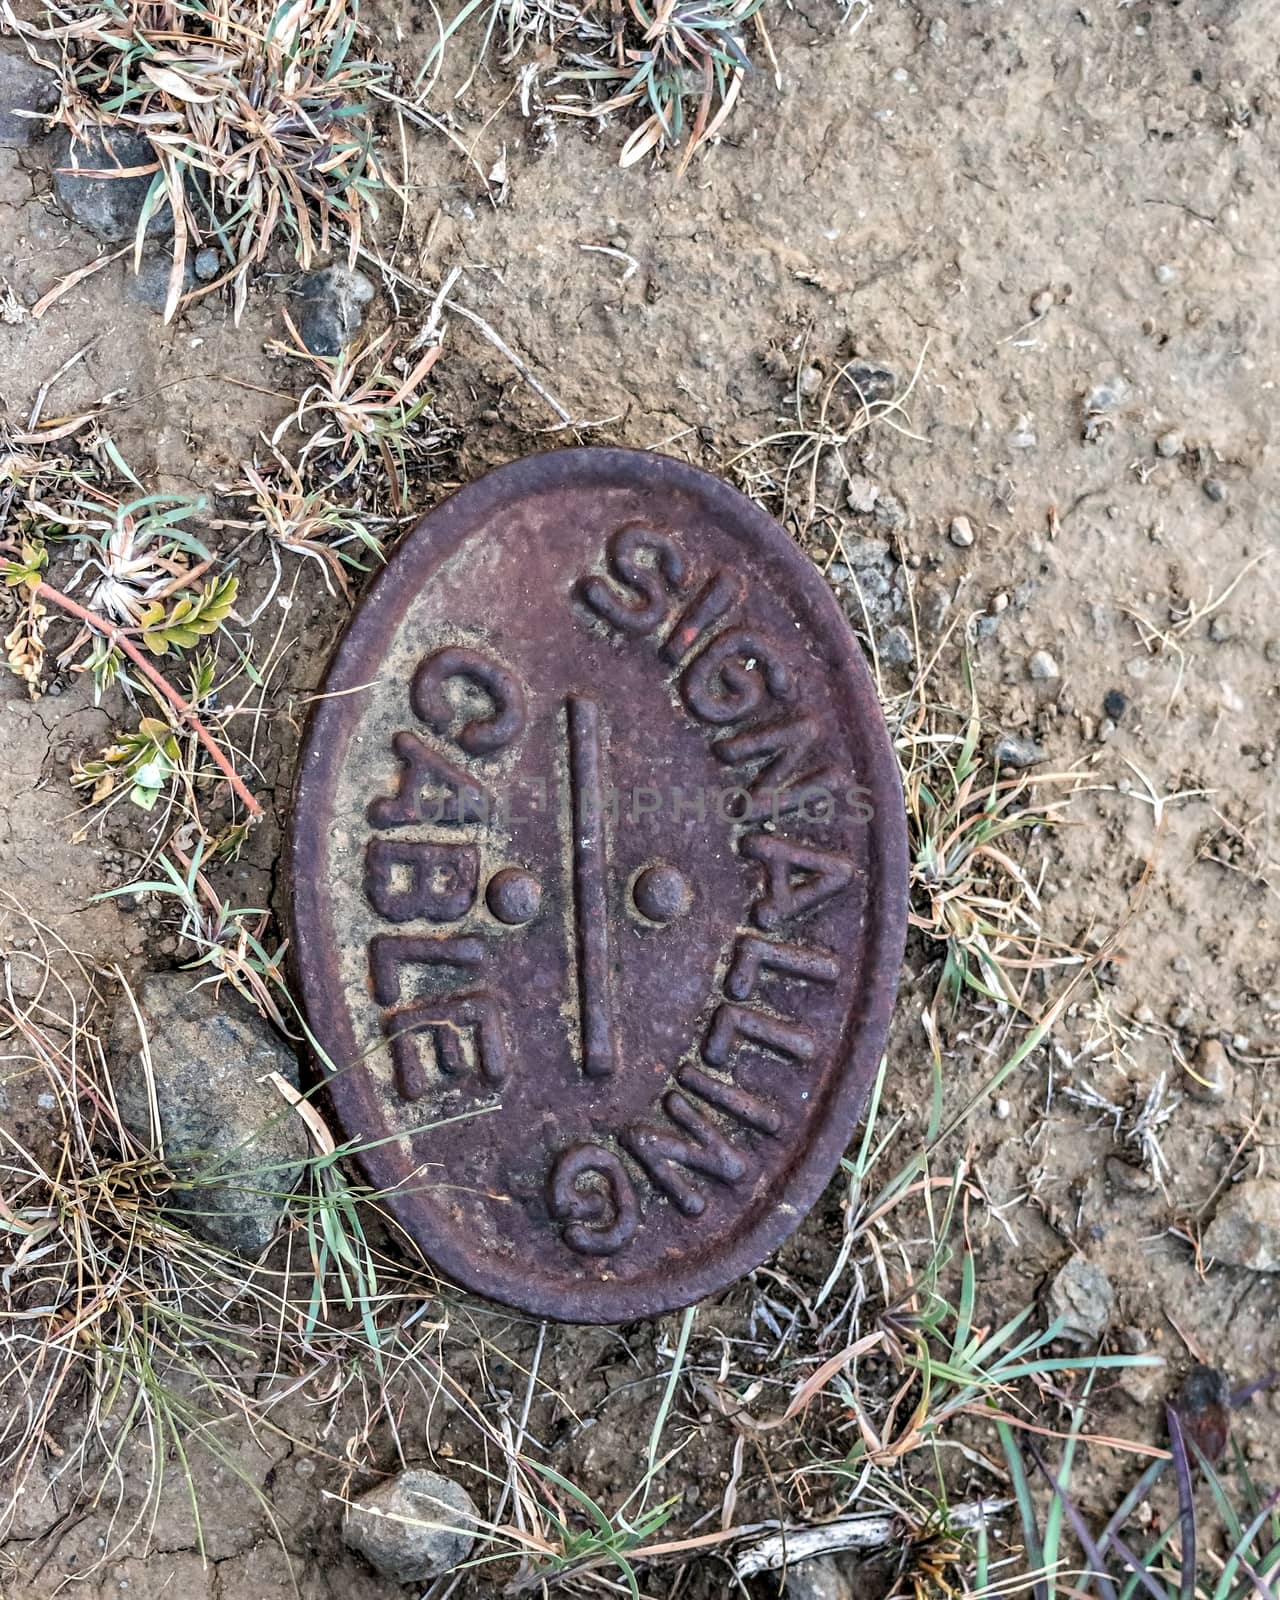 Old signal cable location marker used in railways during British era in India.